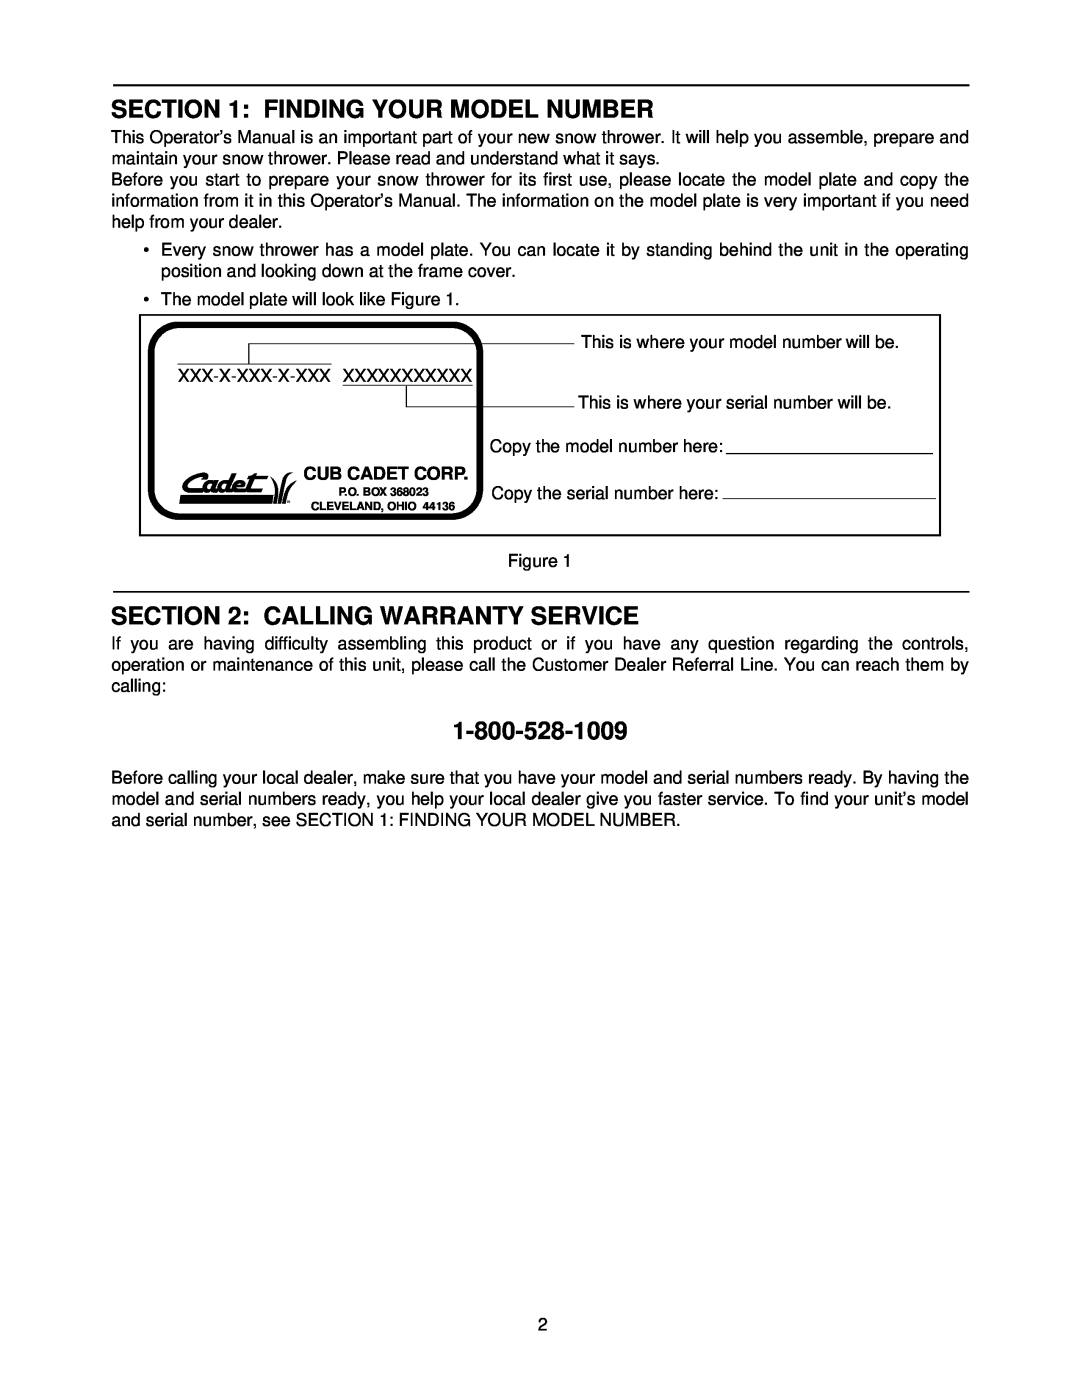 Cub Cadet 1333 SWE manual Finding Your Model Number, Calling Warranty Service, Cub Cadet Corp 